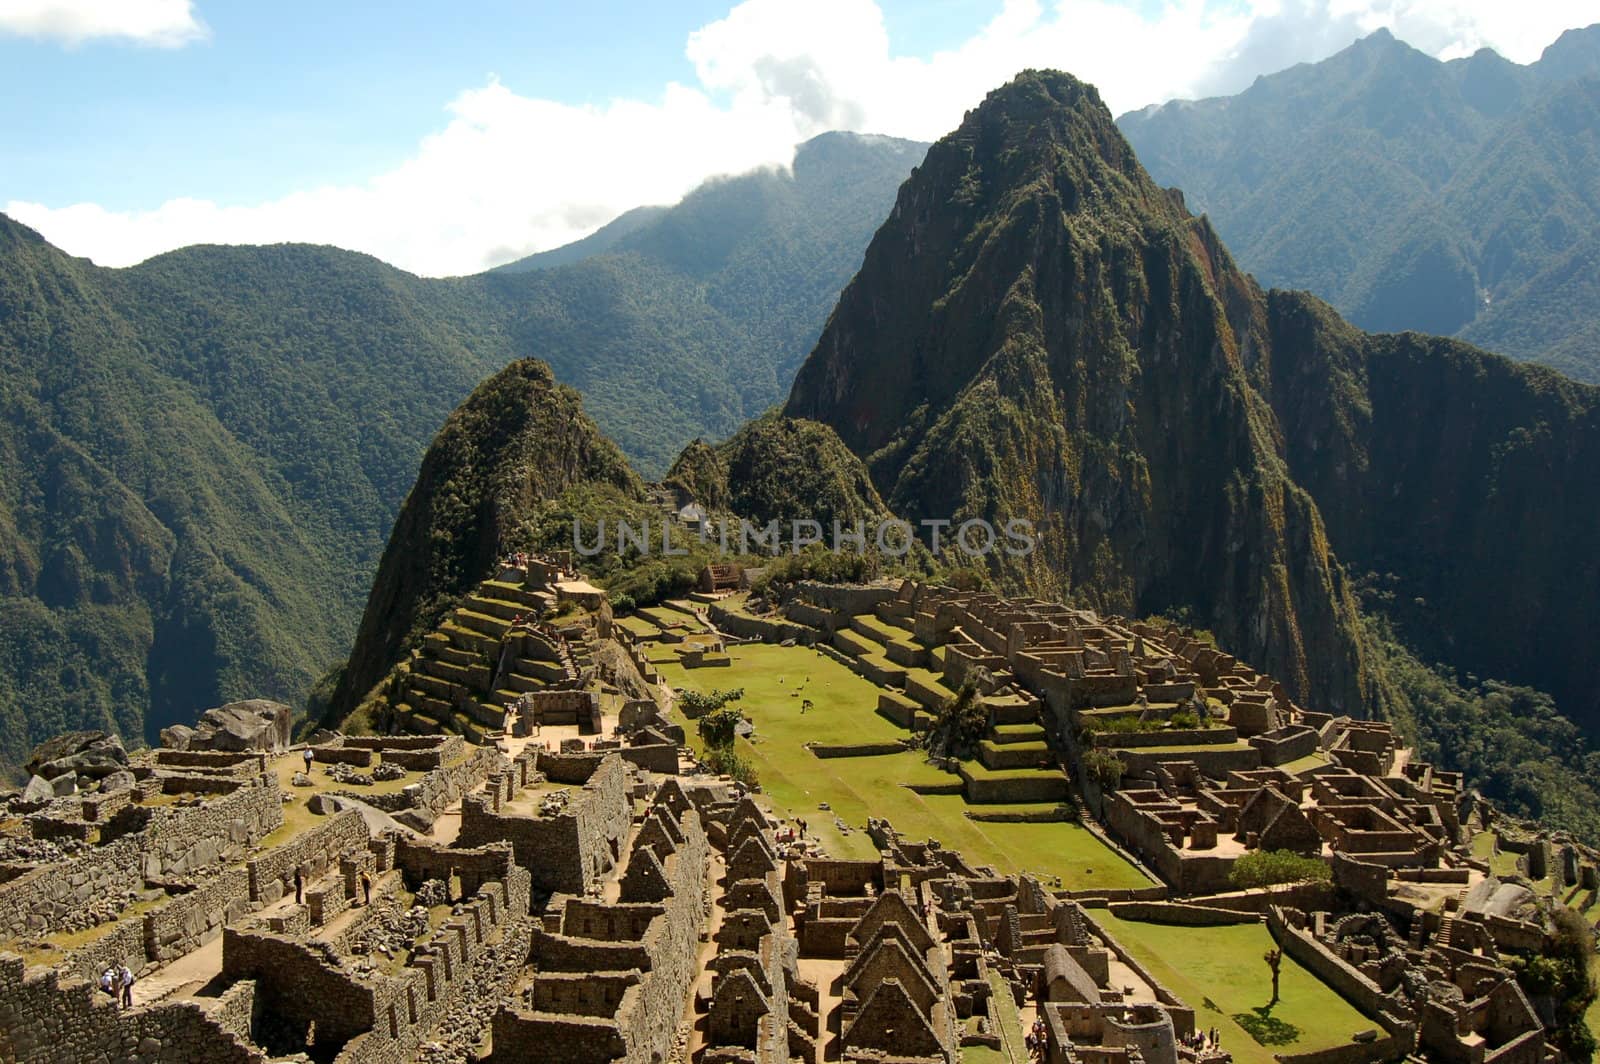 Ruins of the ancient city of the Inca empire